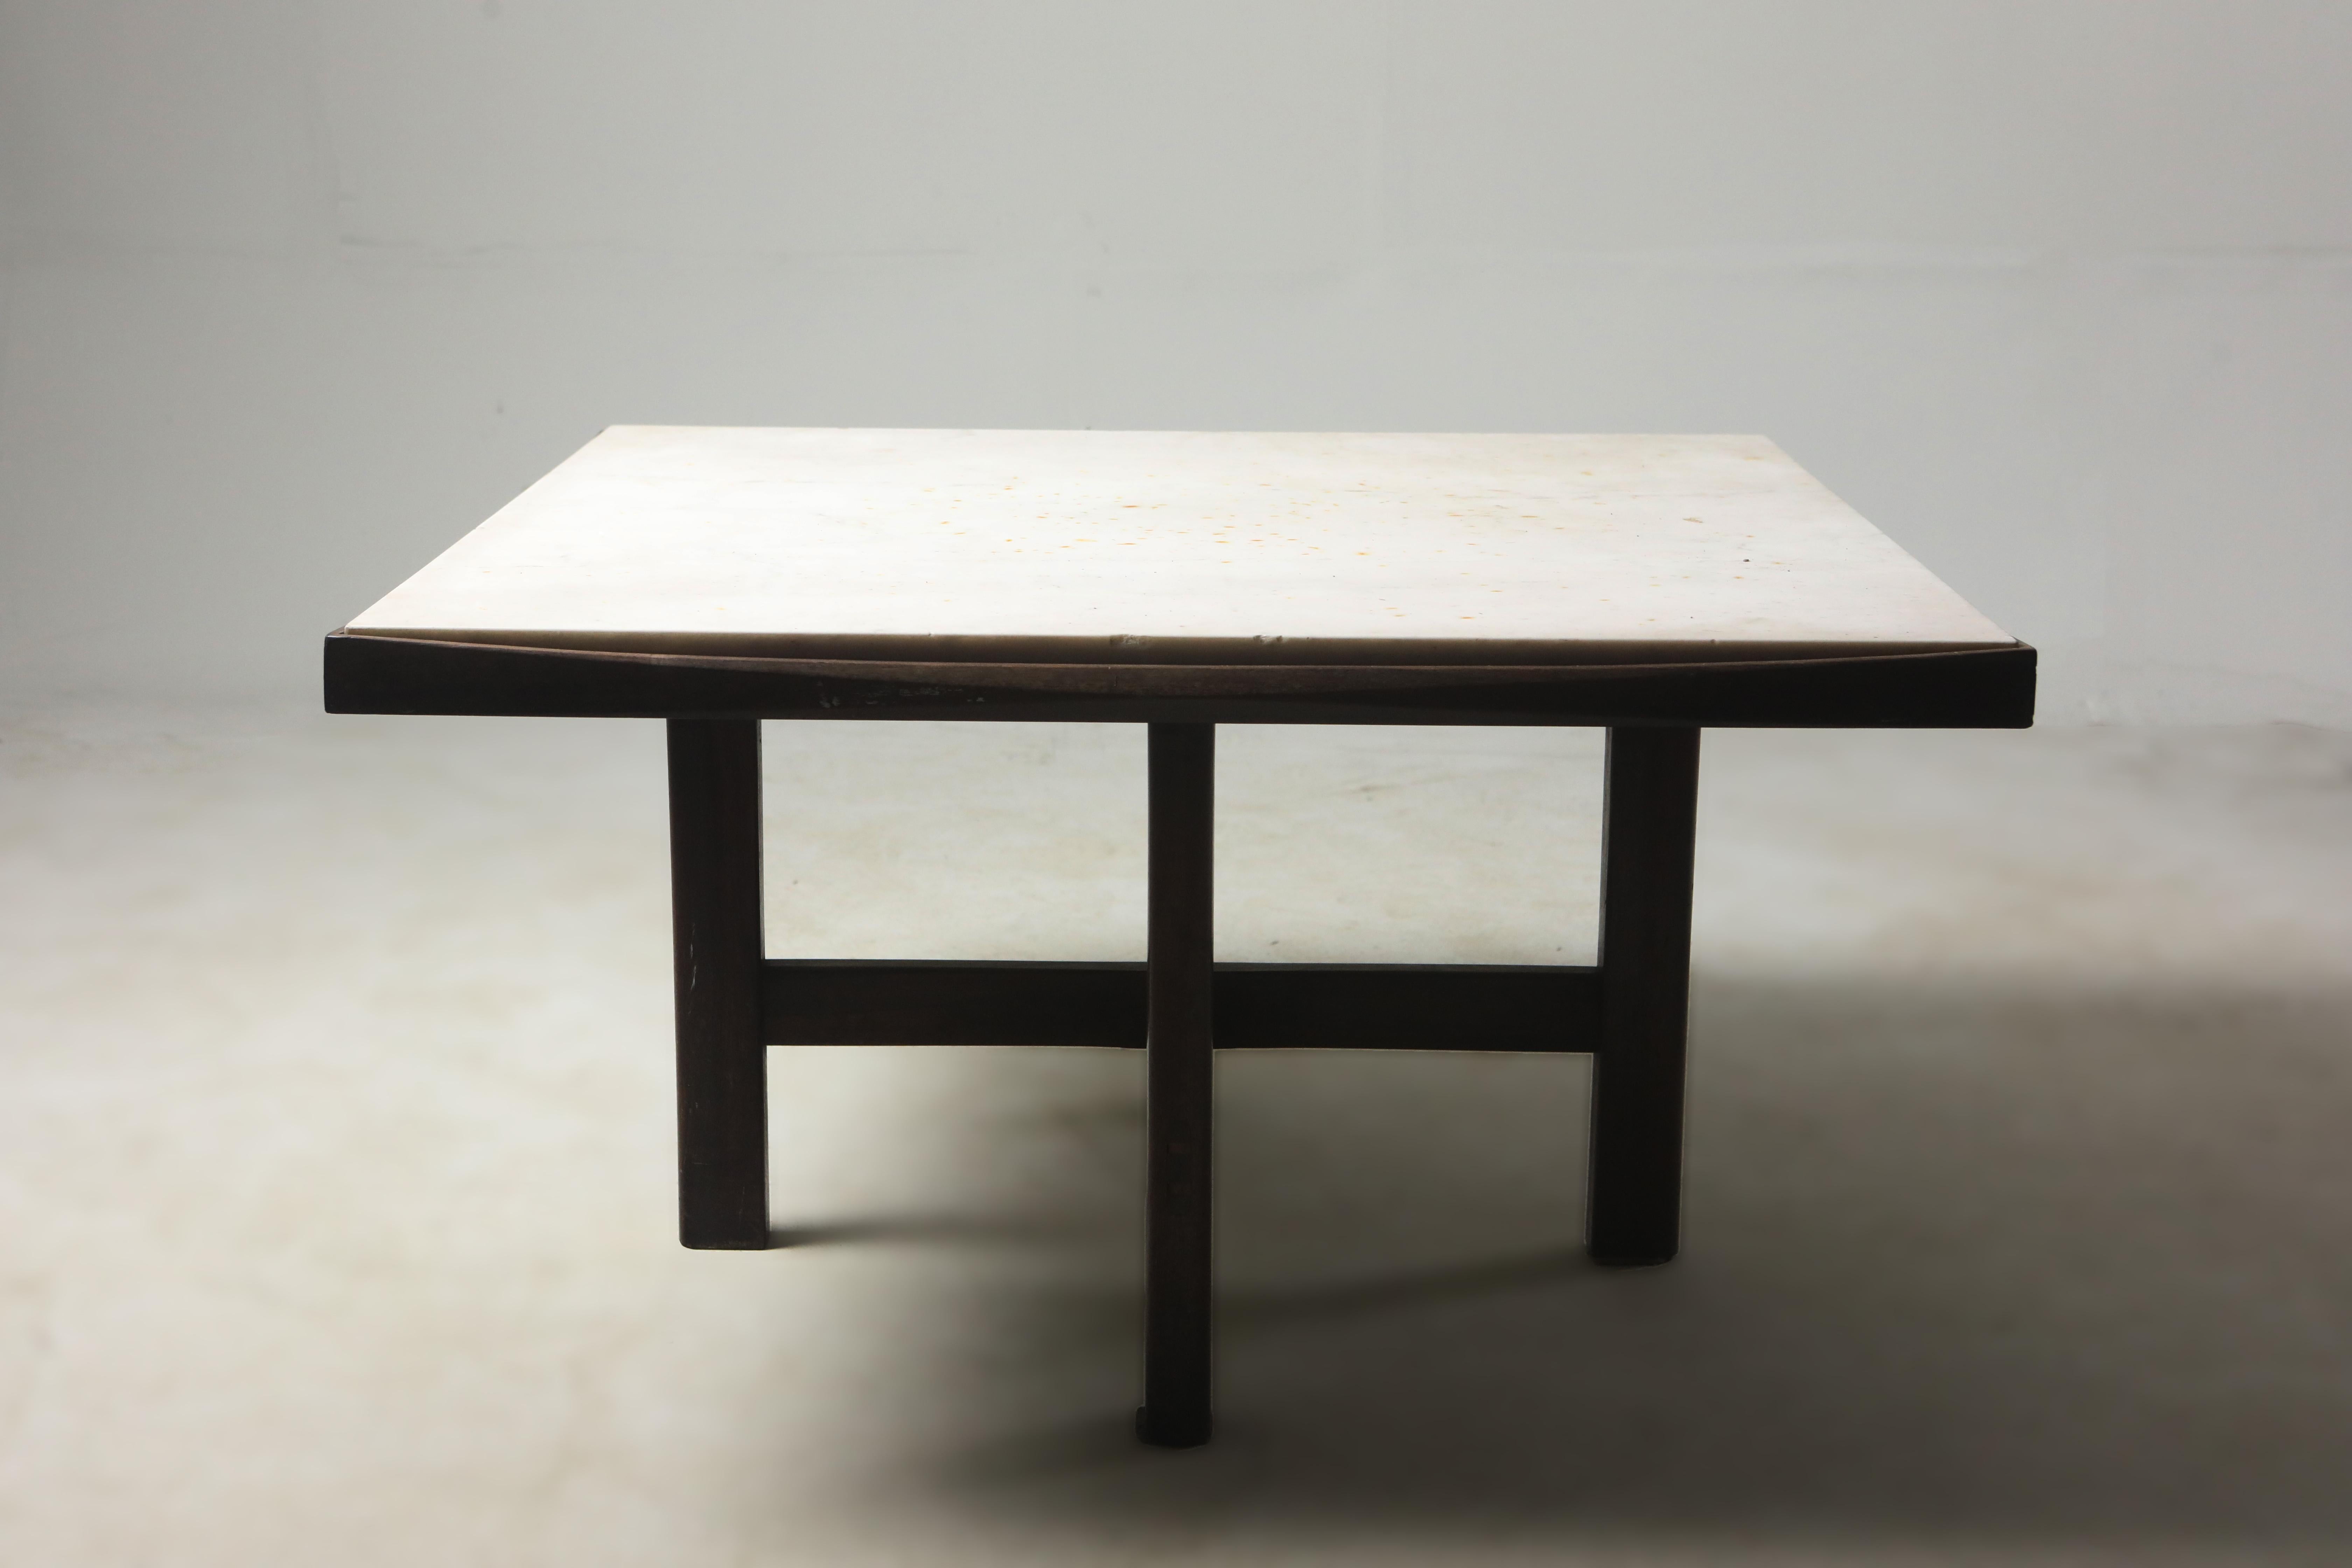 Varnished Mid-Century Modern Marble-Top Center Table by Fátima Arquitetura, Brazil, 1960s